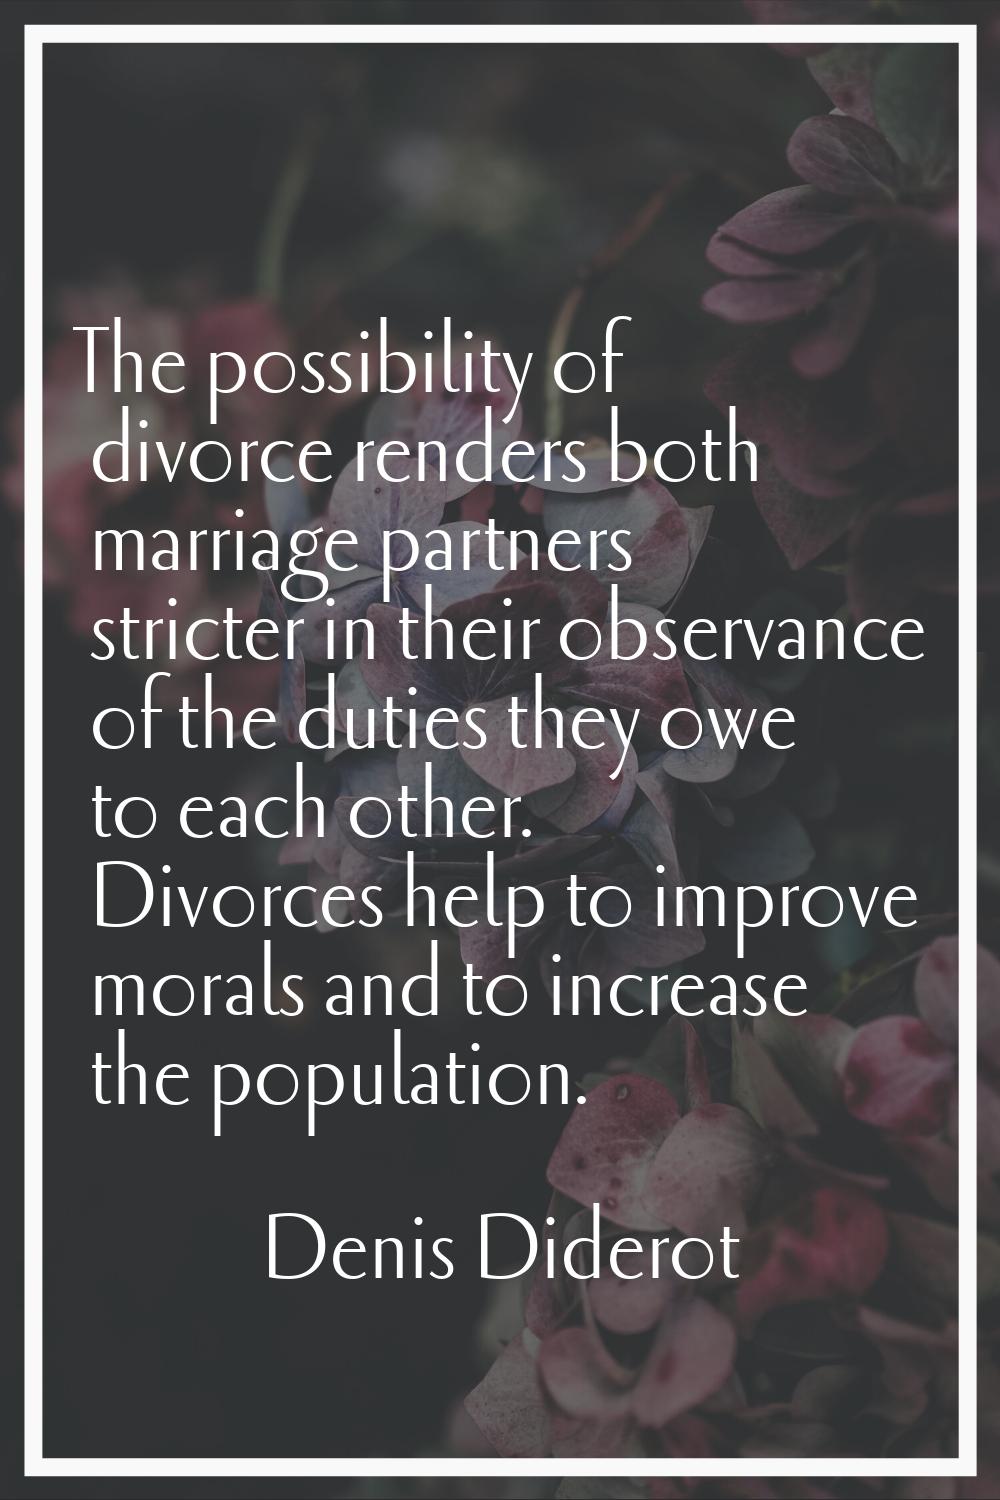 The possibility of divorce renders both marriage partners stricter in their observance of the dutie